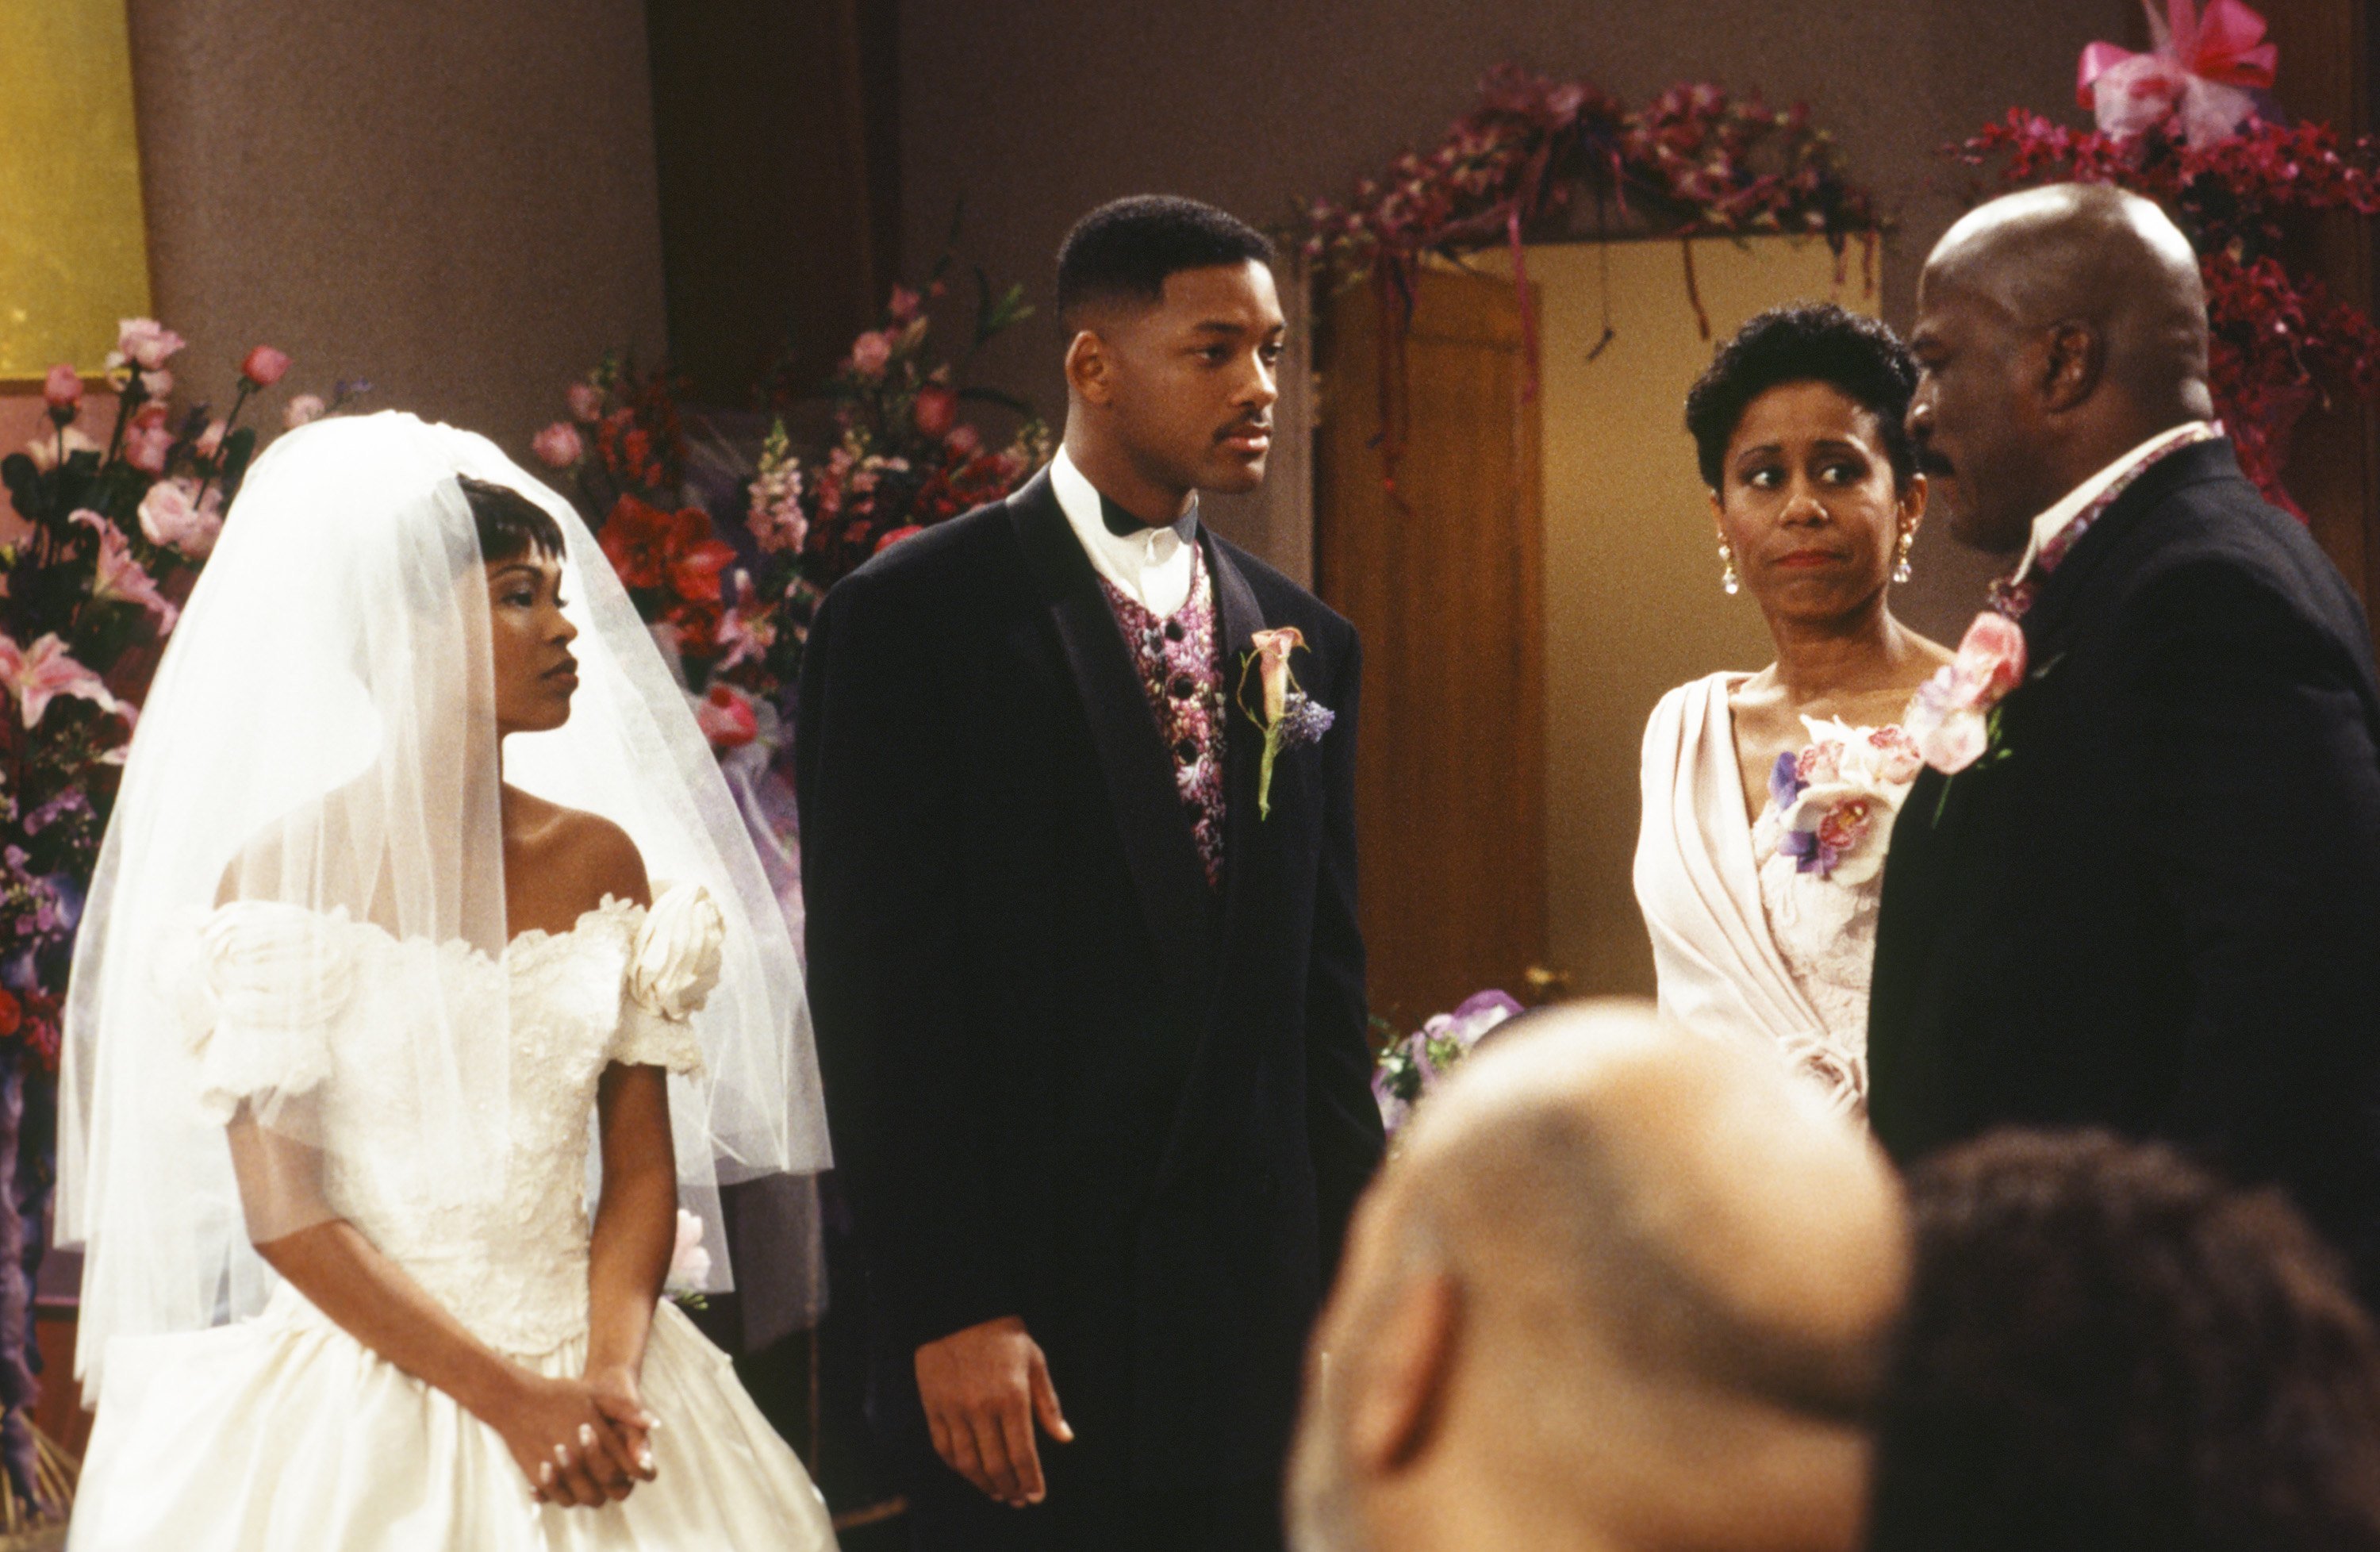 Will Smith faces John Amos at the 'Fresh Prince of Bel-Air' wedding